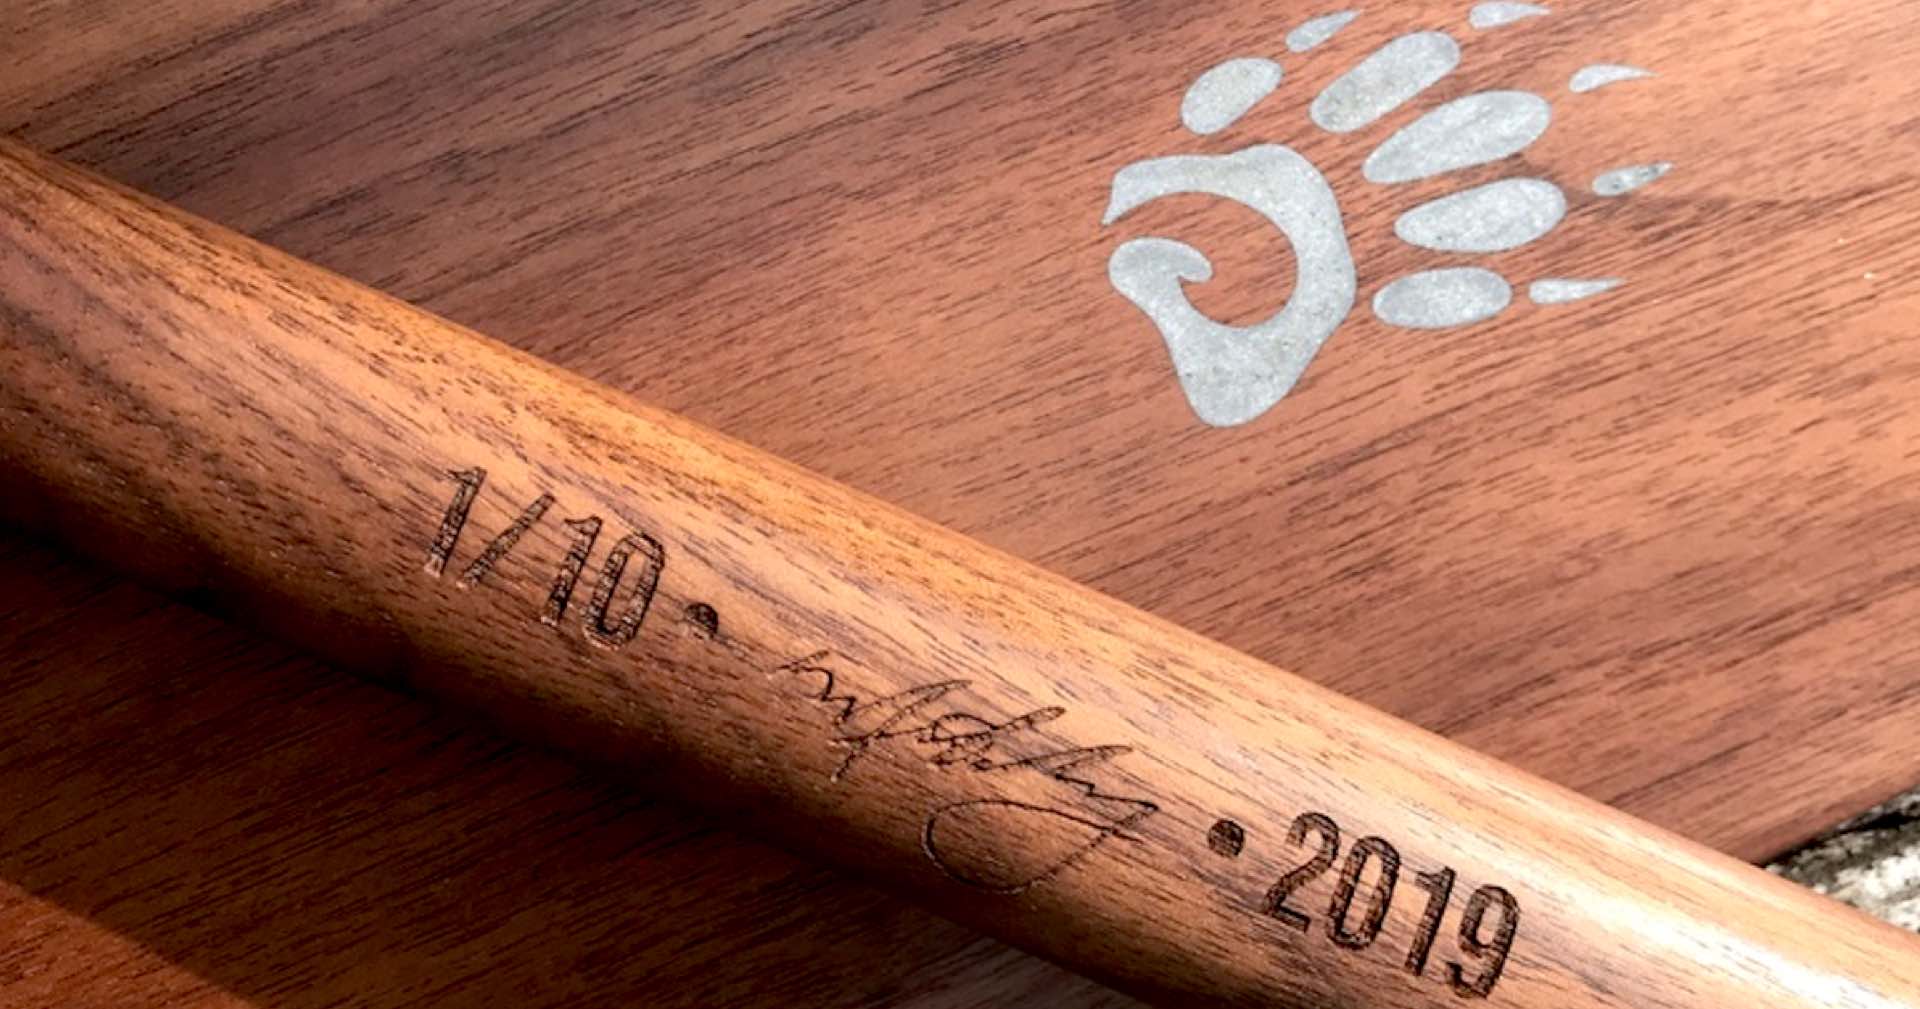 zoomed in image of aluminum epoxy inlay on a limited edition Badger Paddle with numbered signed and dated shaft of second special edition paddle limited issue